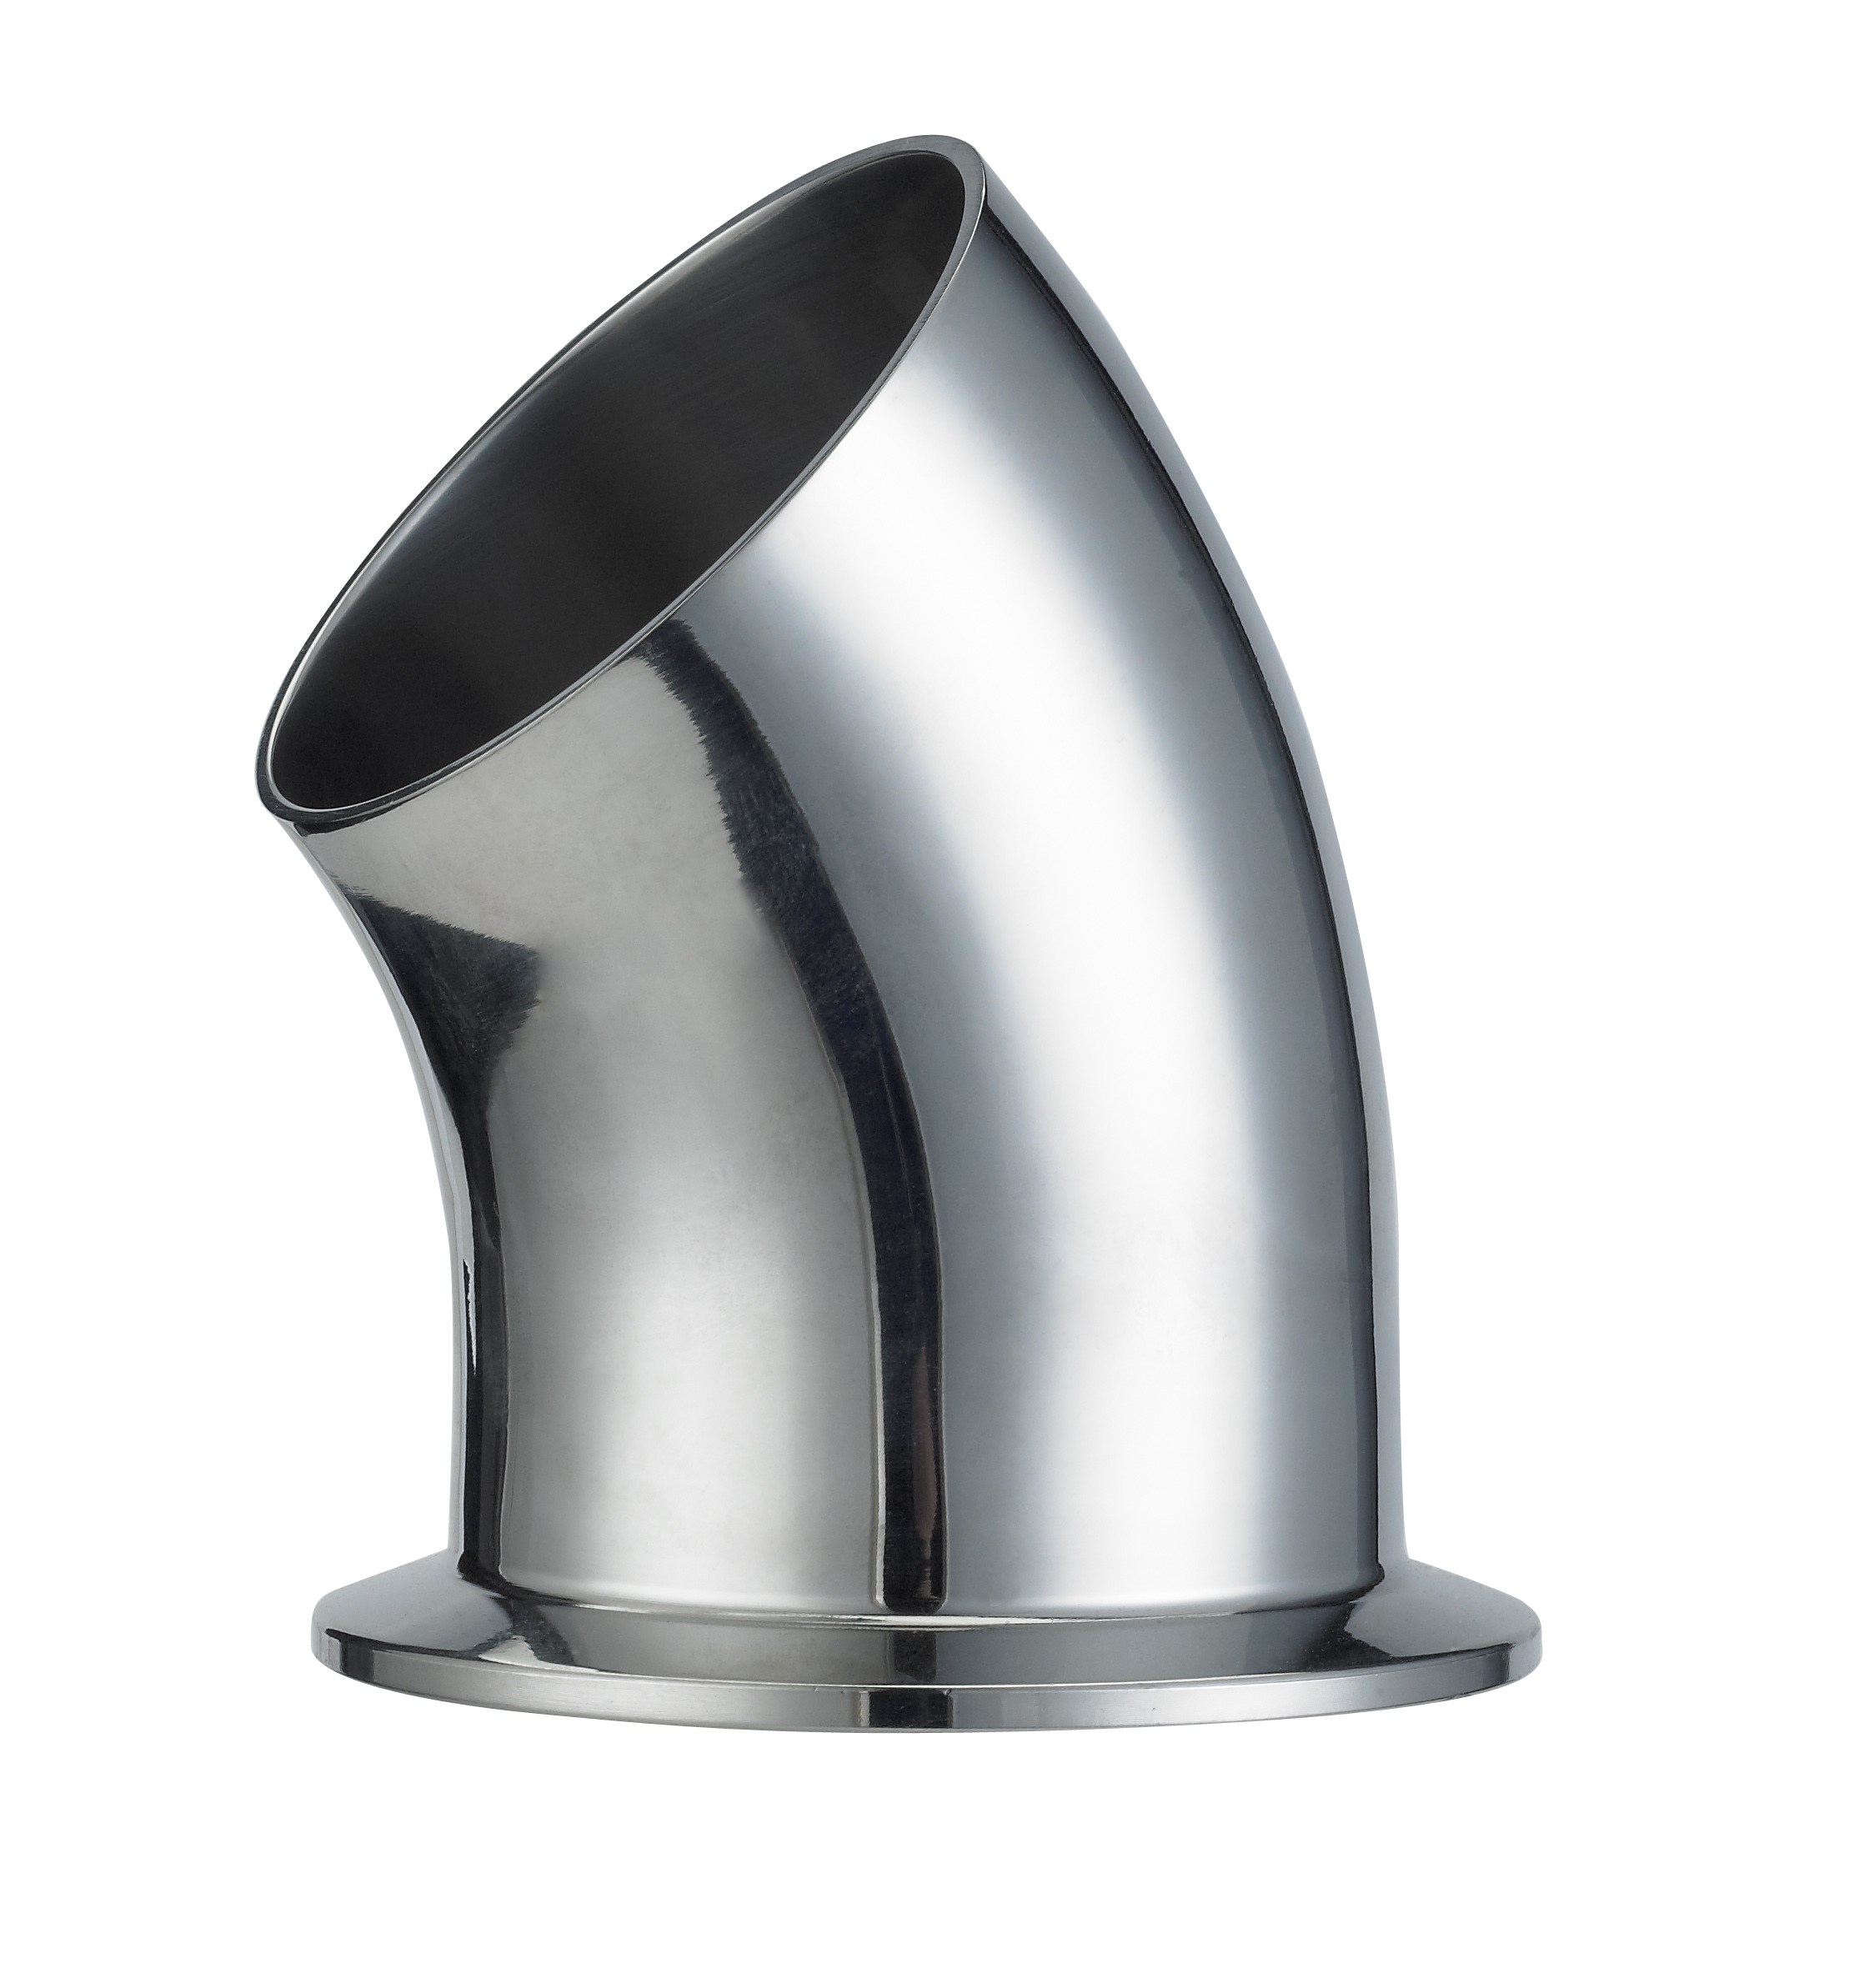 Stainless Steel ISO-L2KS ISO/IDF Food Grad Polished Angle Bend With Straight